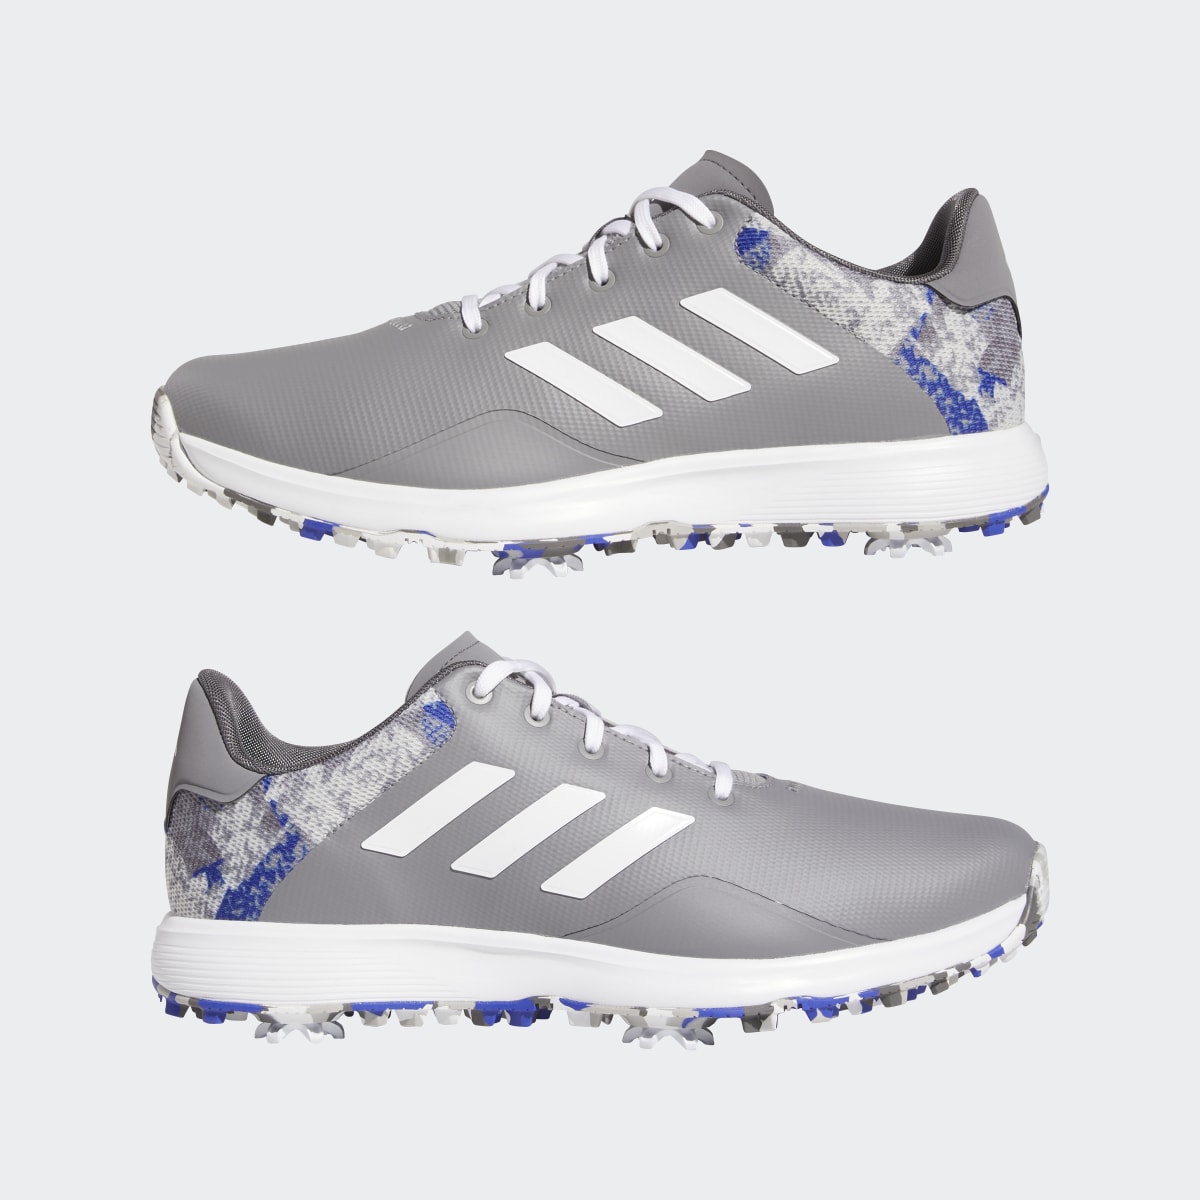 Adidas S2G Golf Shoes. 7